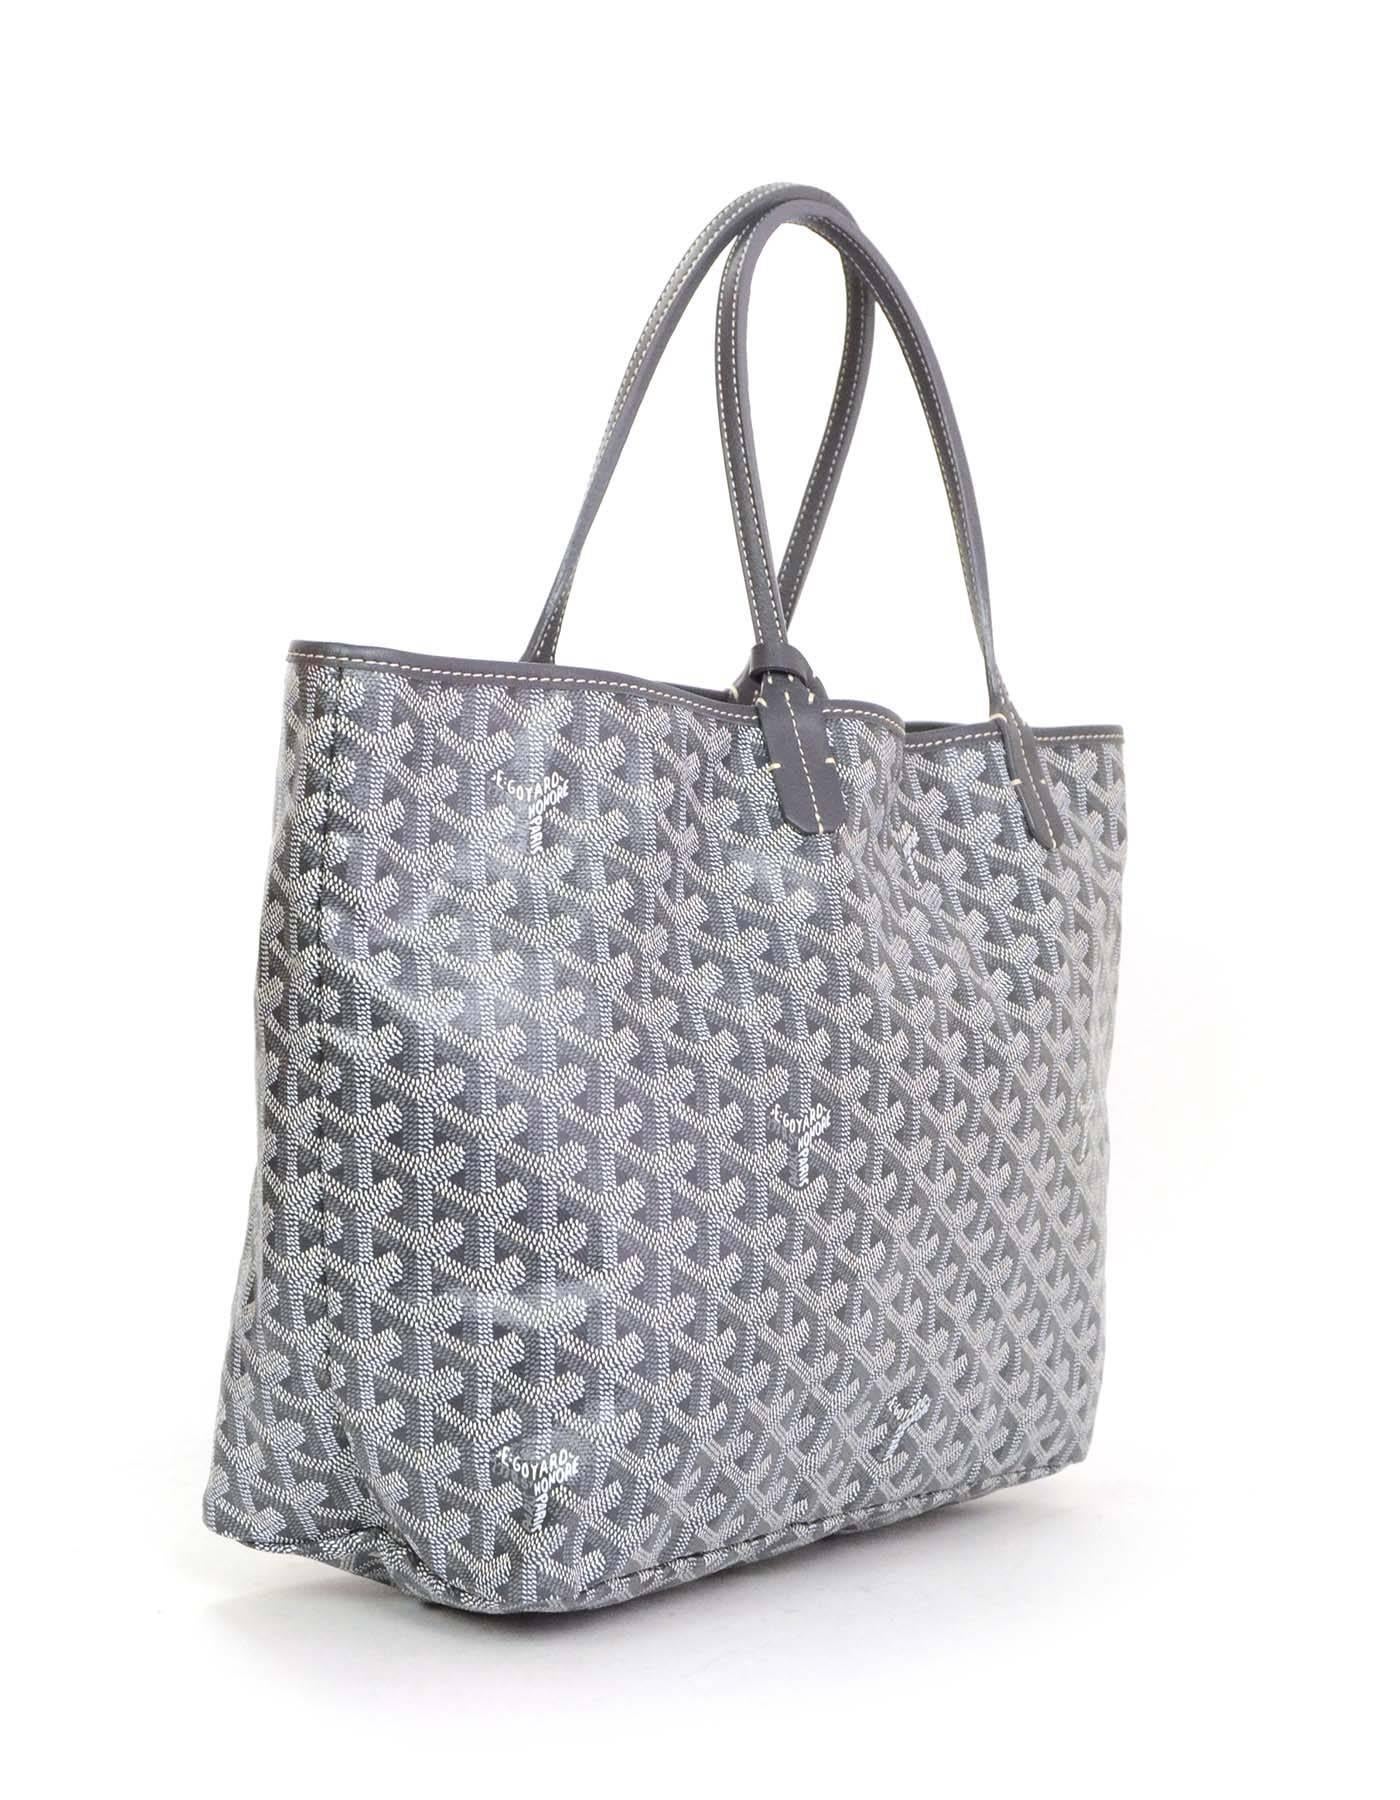 Goyard Grey Chevron Saint Louis PM Tote
Features grey cowhide leather trim

    Made In: France
    Color: Grey and white
    Hardware: Silvertone
    Materials: Coated canvas and leather
    Lining: Beige cotton
    Closure/Opening: Open